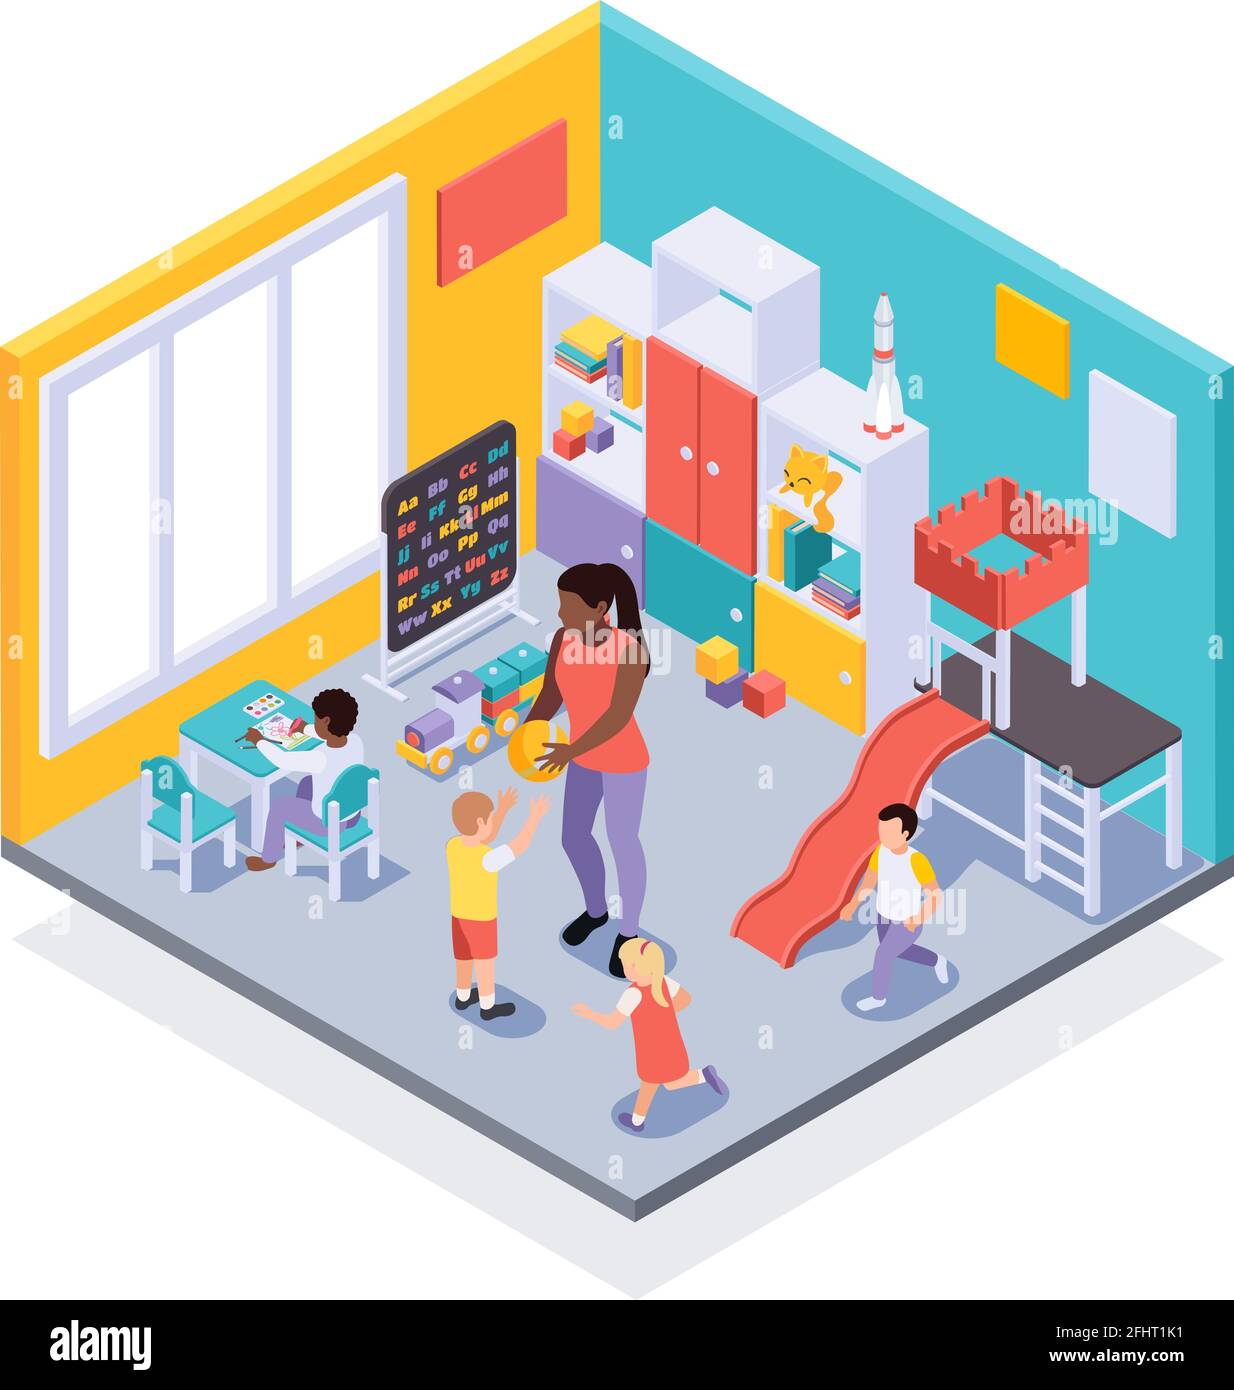 Kindergarten classroom playful learning environment interior isometric view with children moving around playing with teacher vector illustration Stock Vector